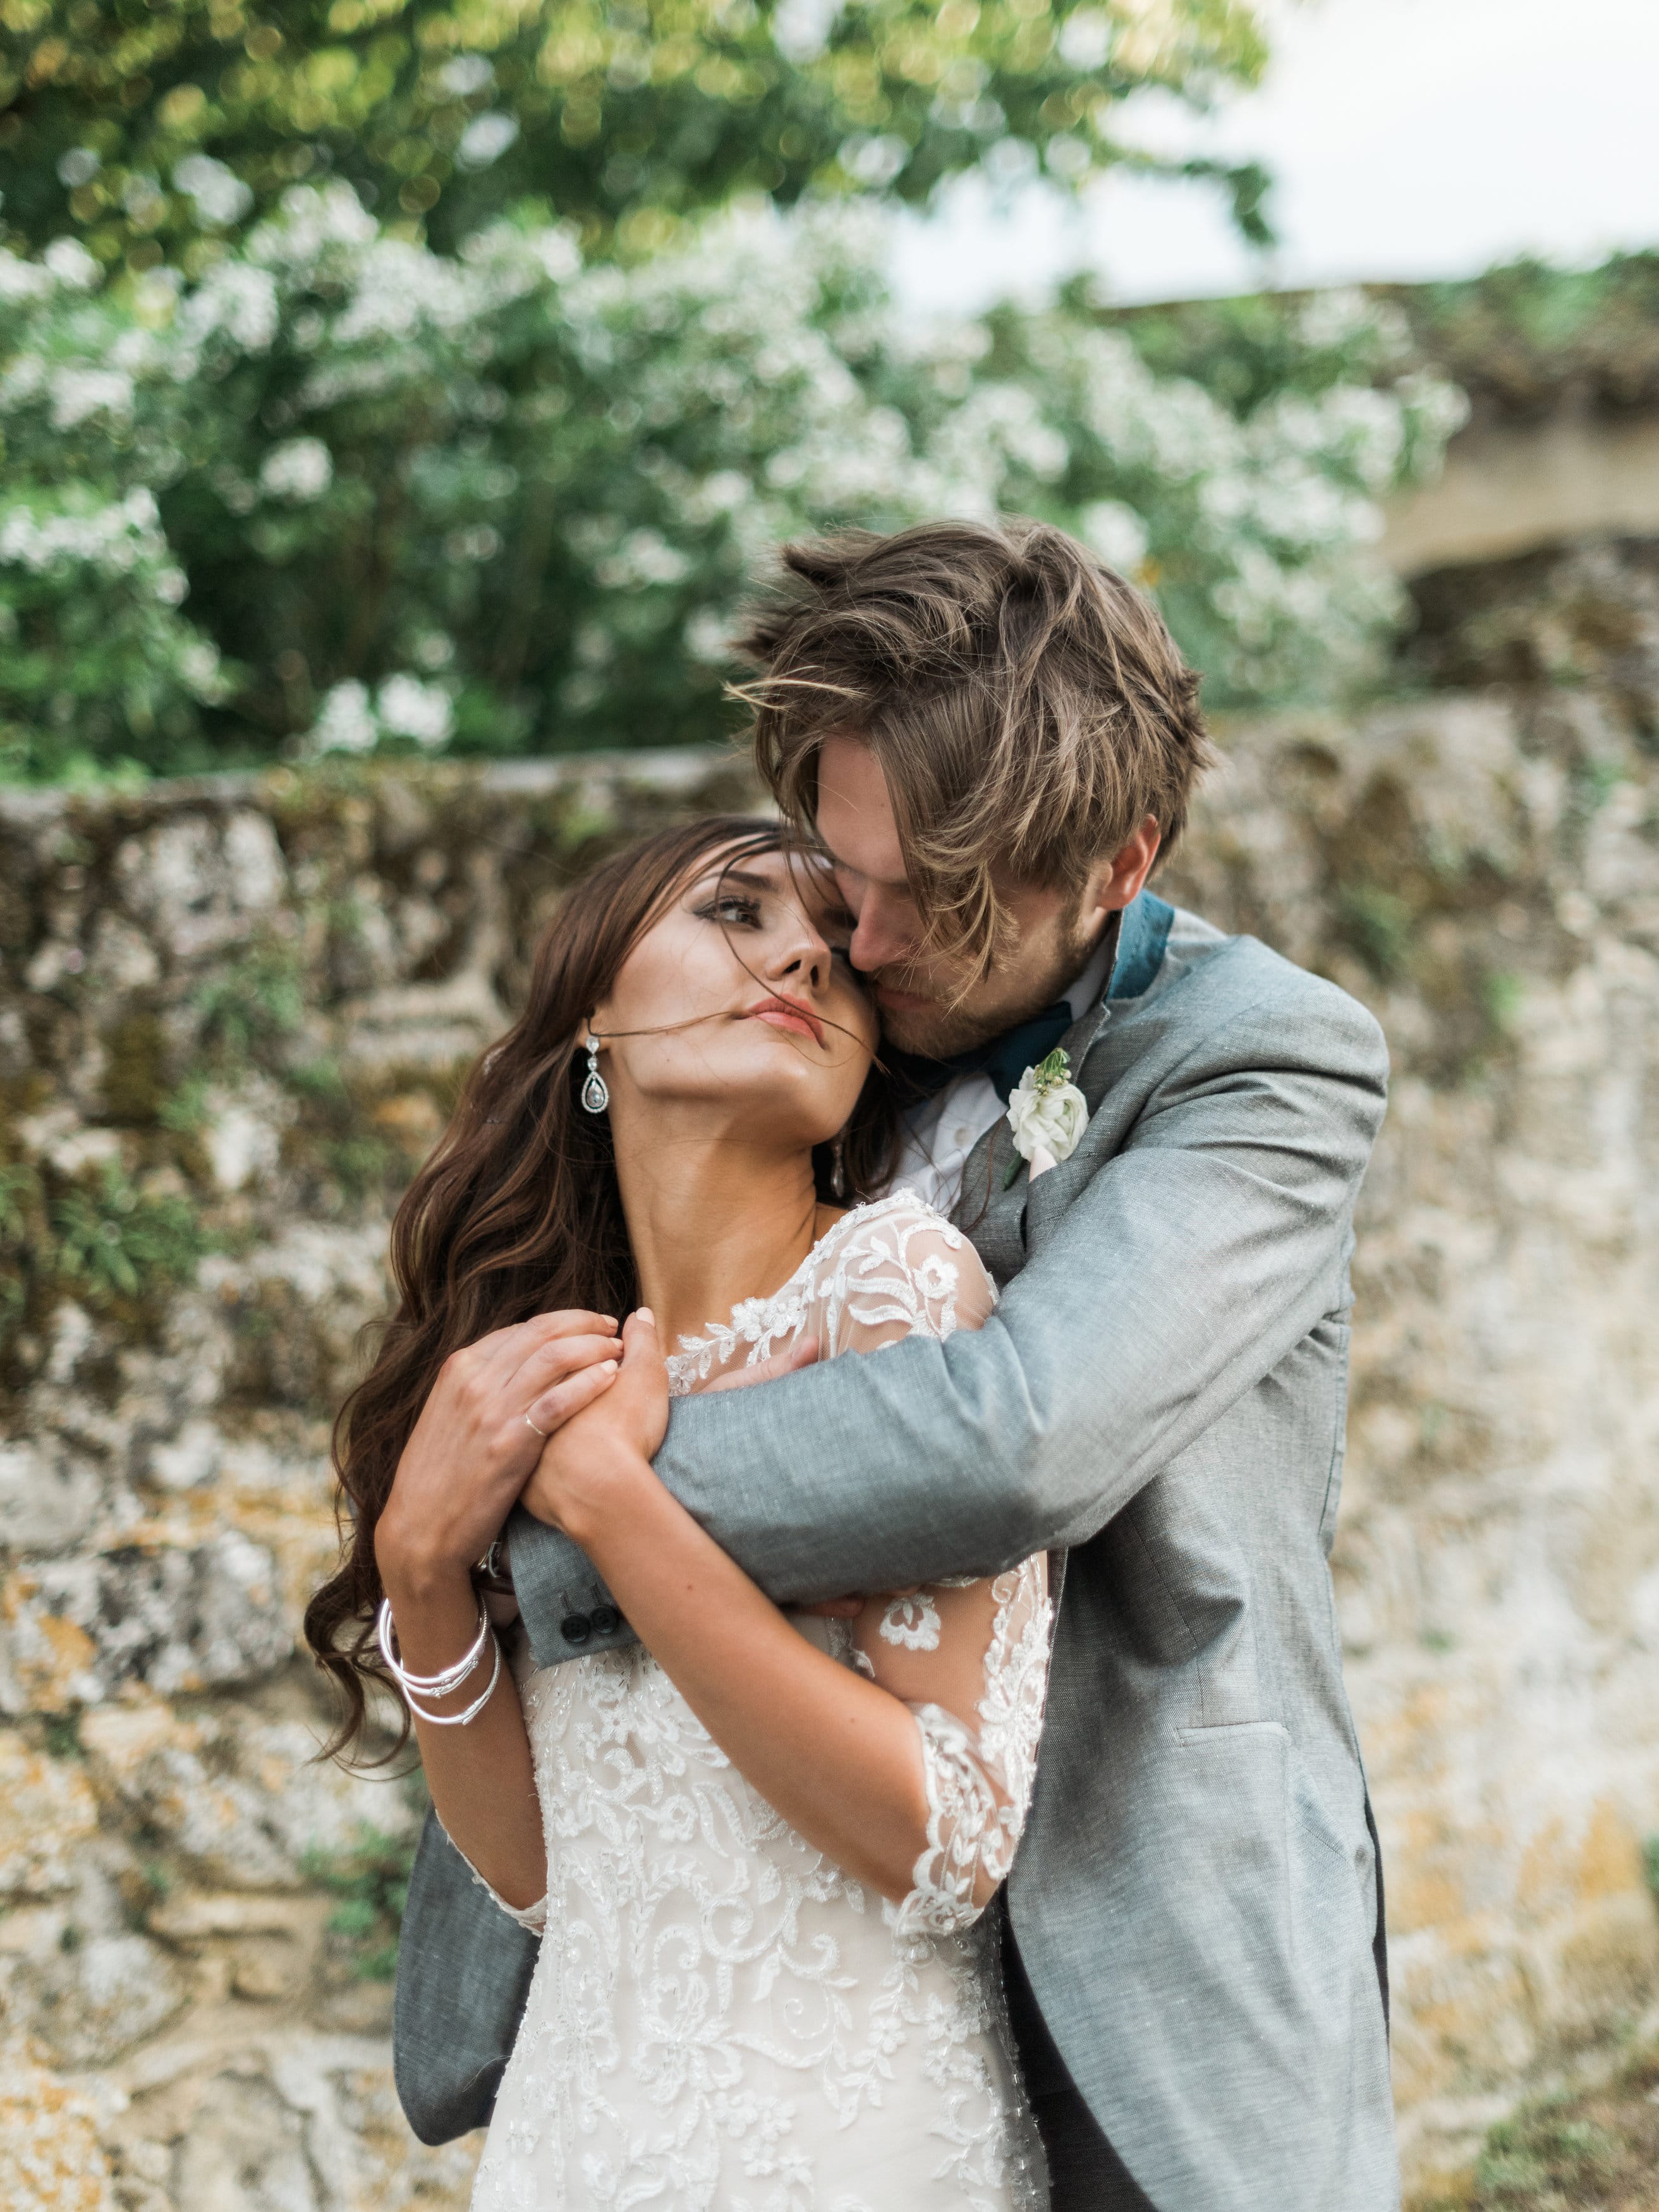 Intimate Elopment in Southern France - Ilona and David Wedding featuring Verina by Maggie Sottero